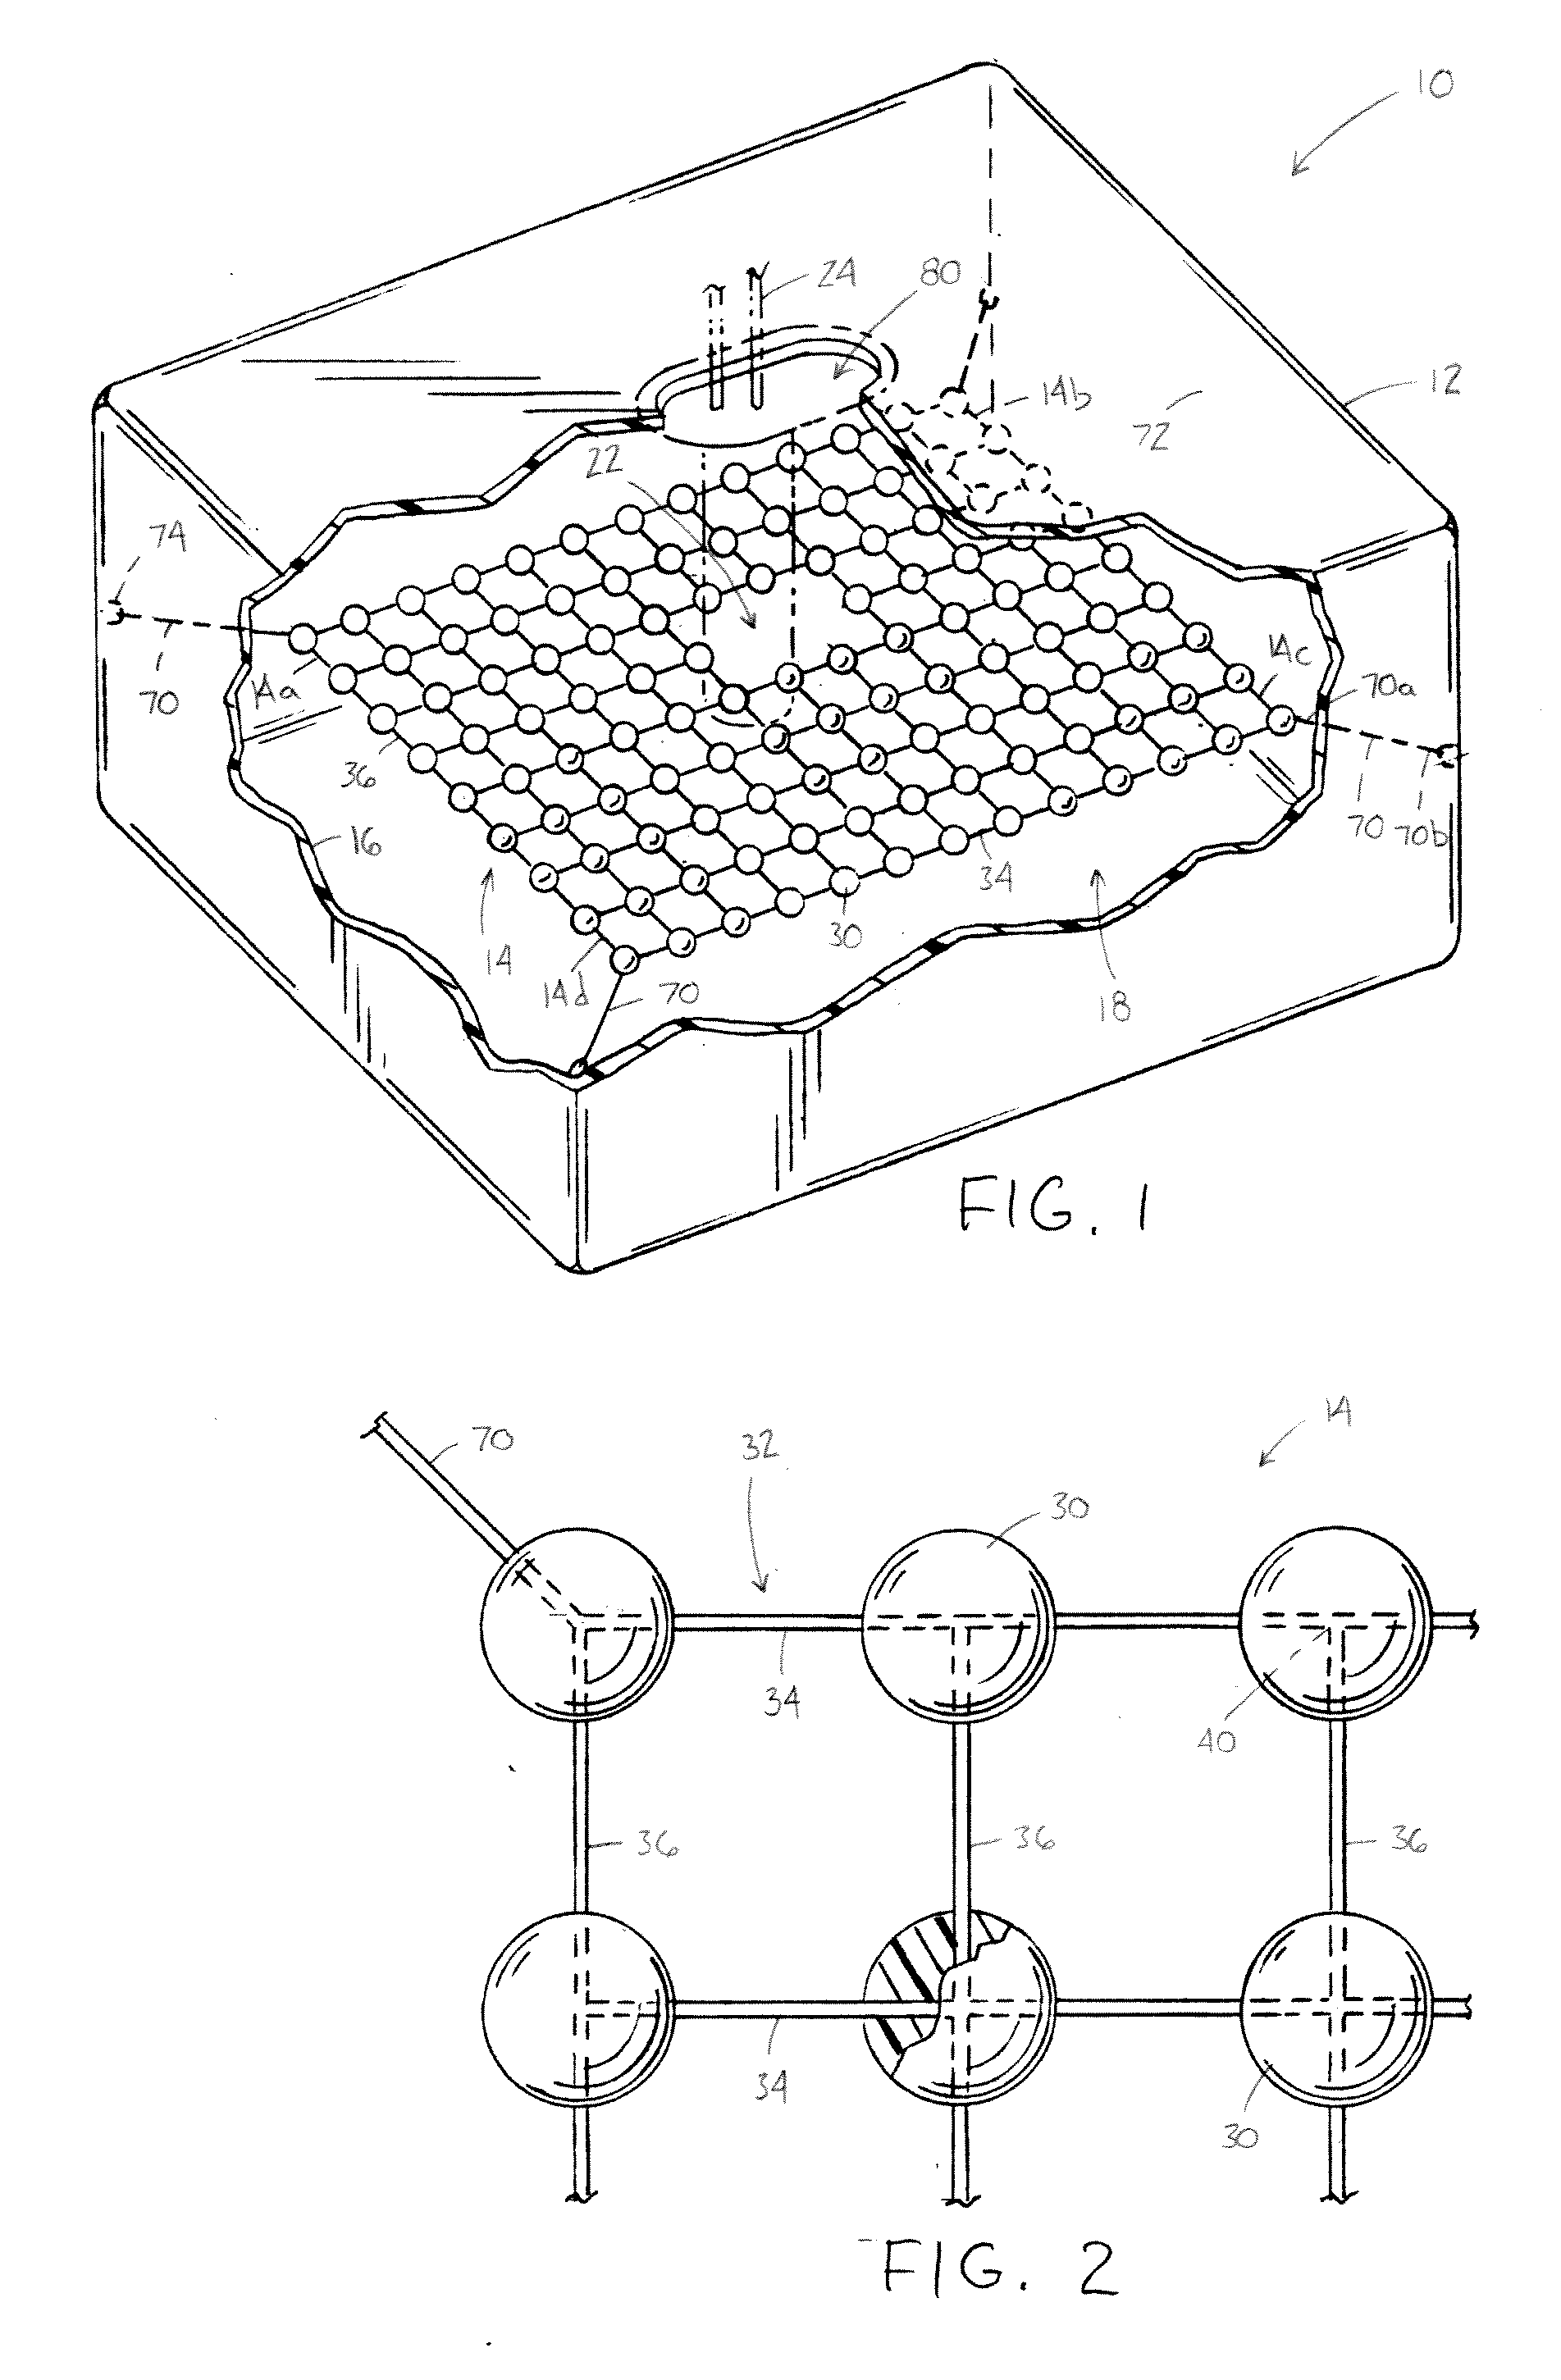 Floating Absorber Assembly for Reduced Fuel Slosh Noise